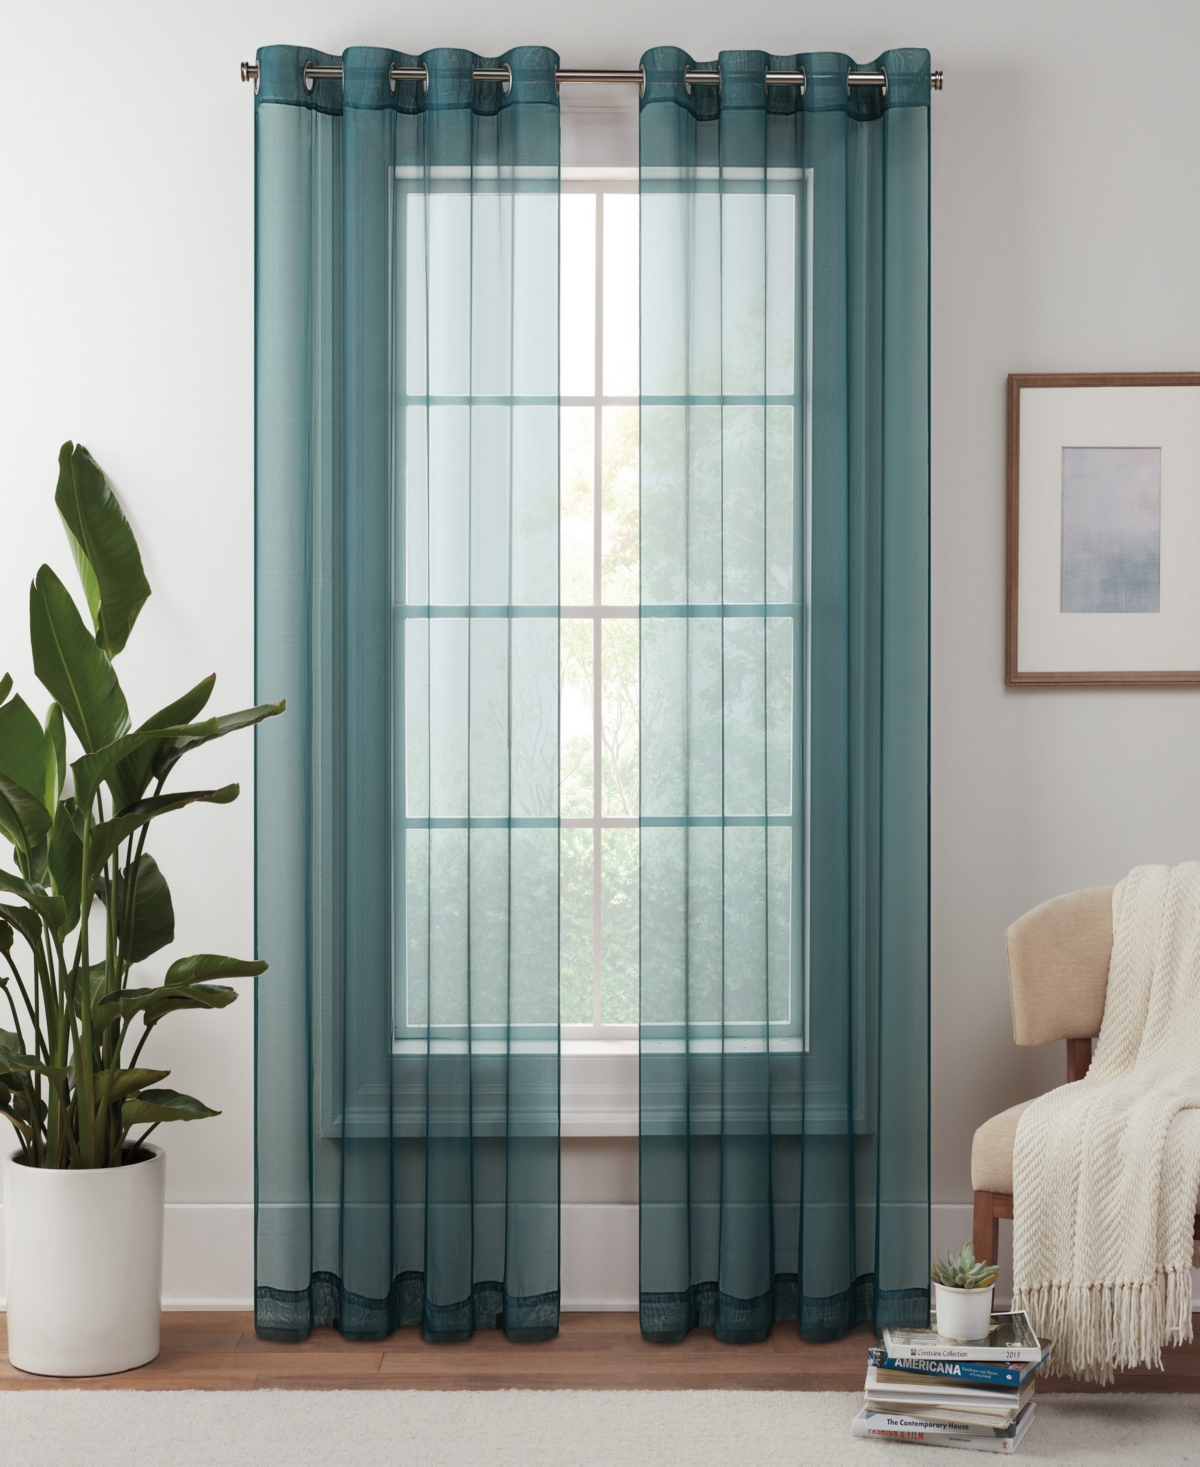 Eclipse Livia Sheer Voile Grommet Curtain Panel, 54" X 95" In Teal